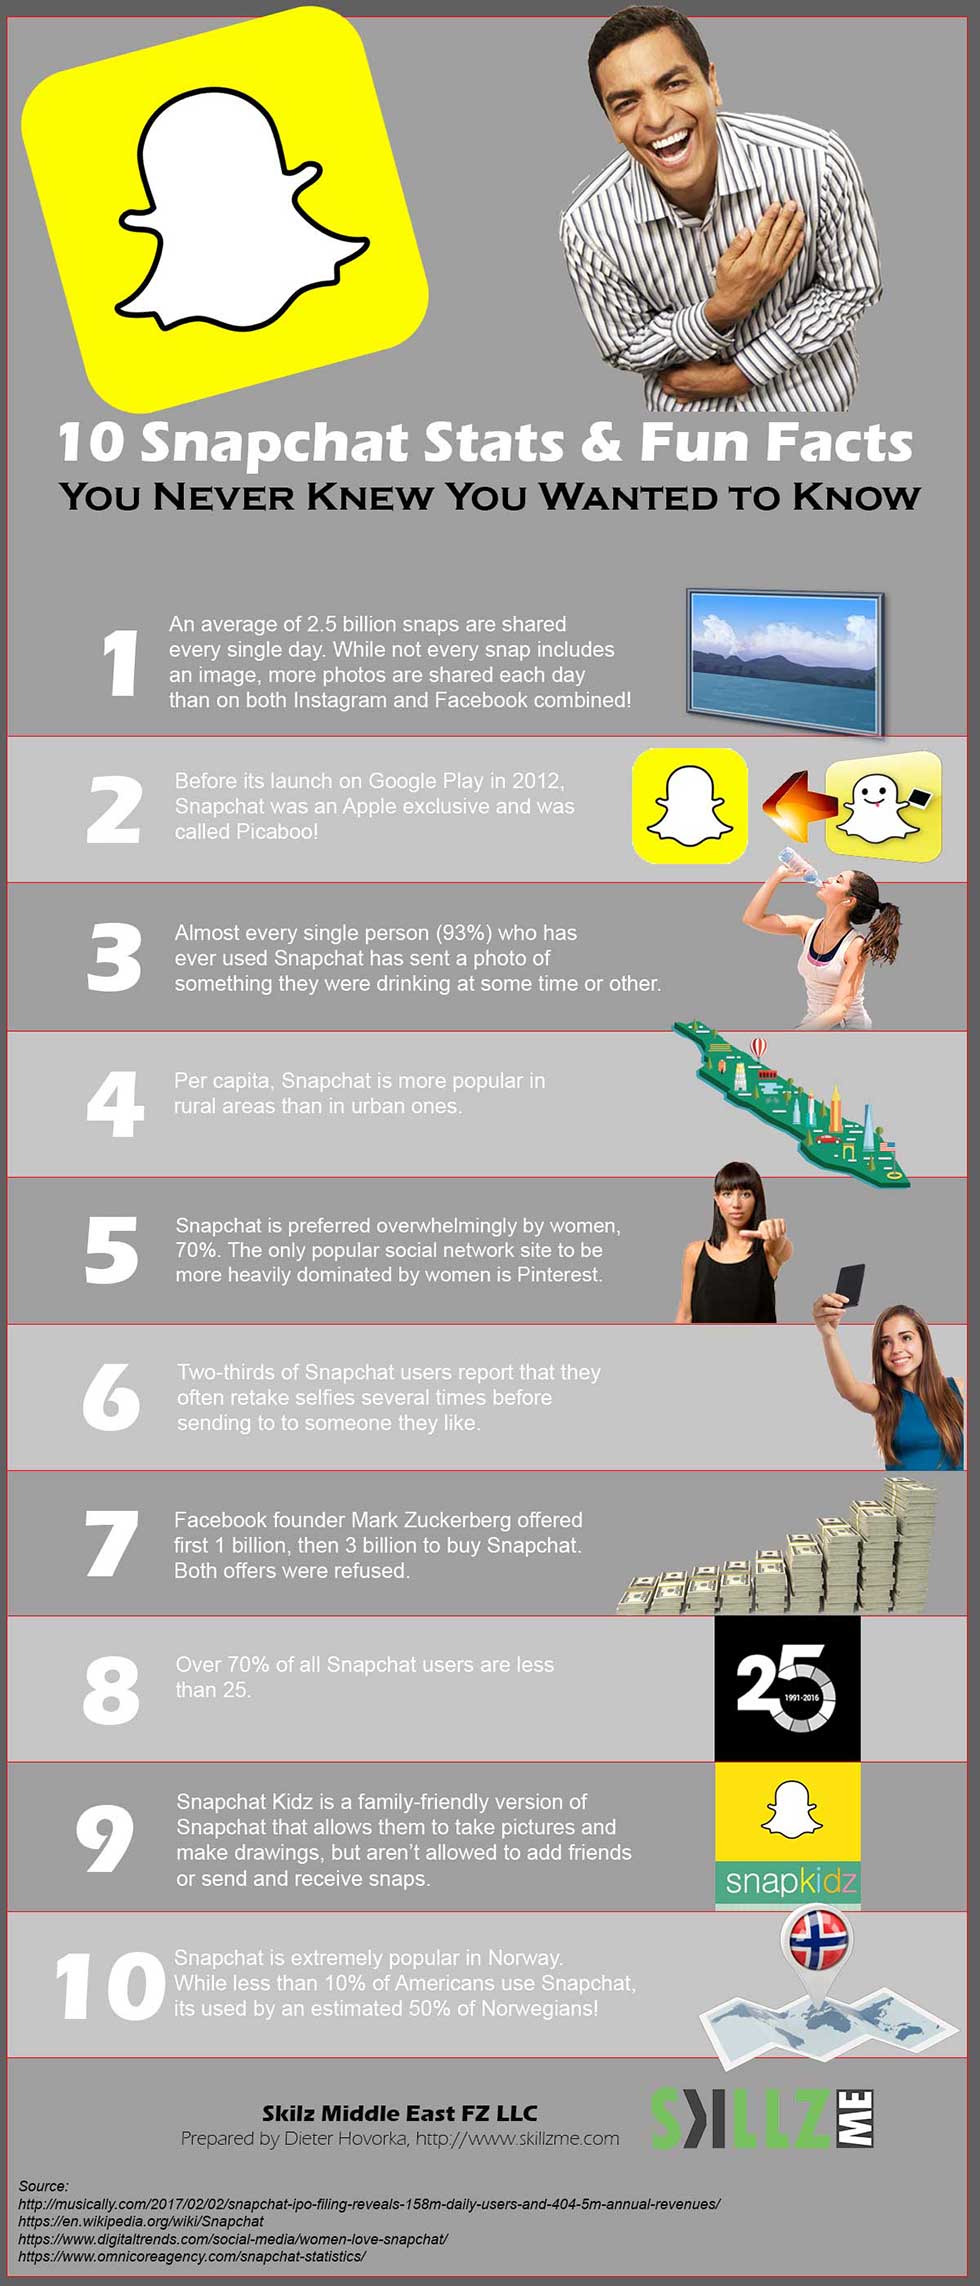 10 Snapchat Stats & Fun Facts You Never Knew